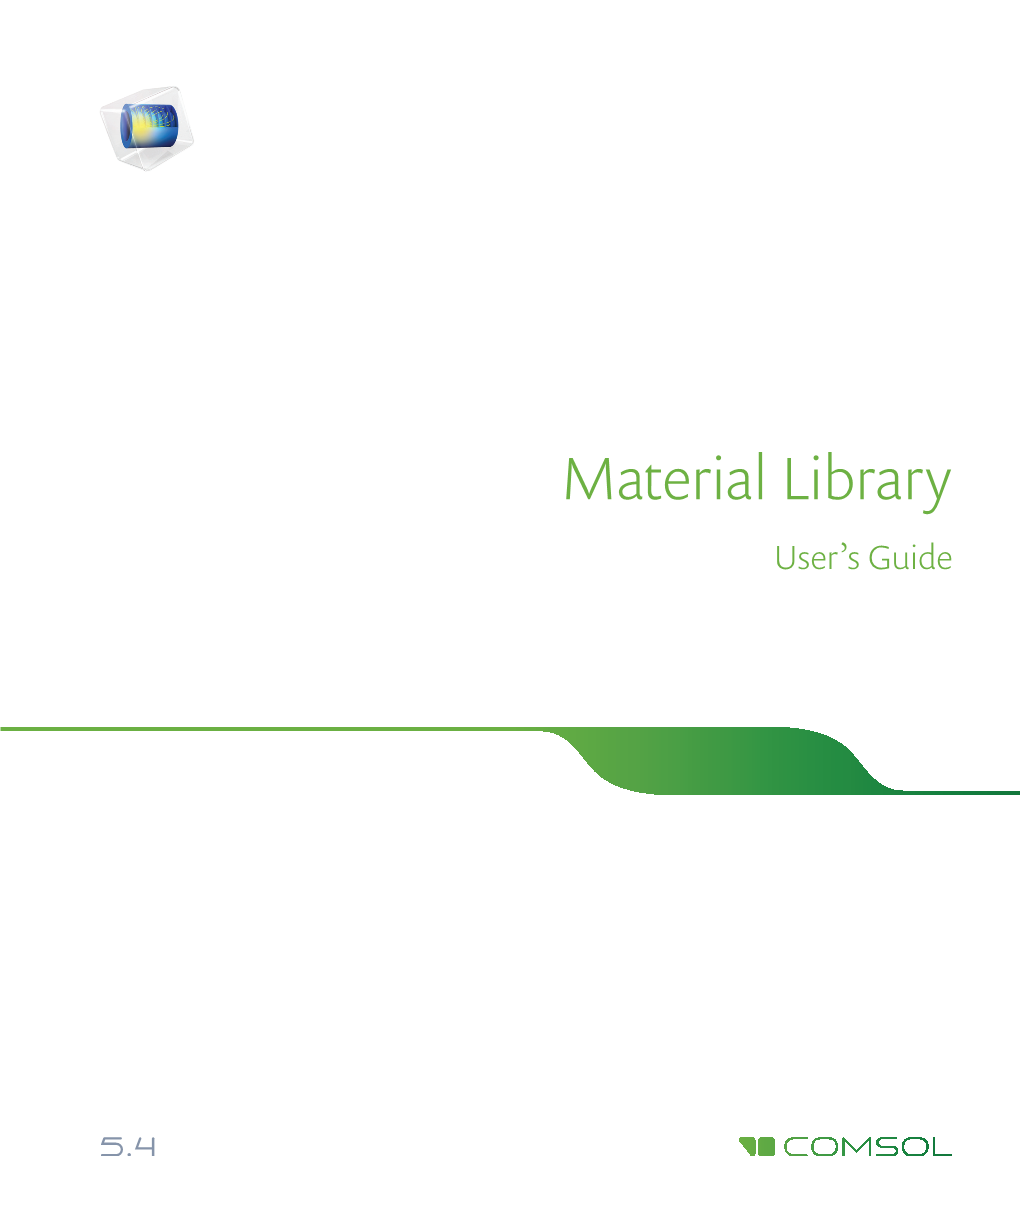 The Material Library User's Guide